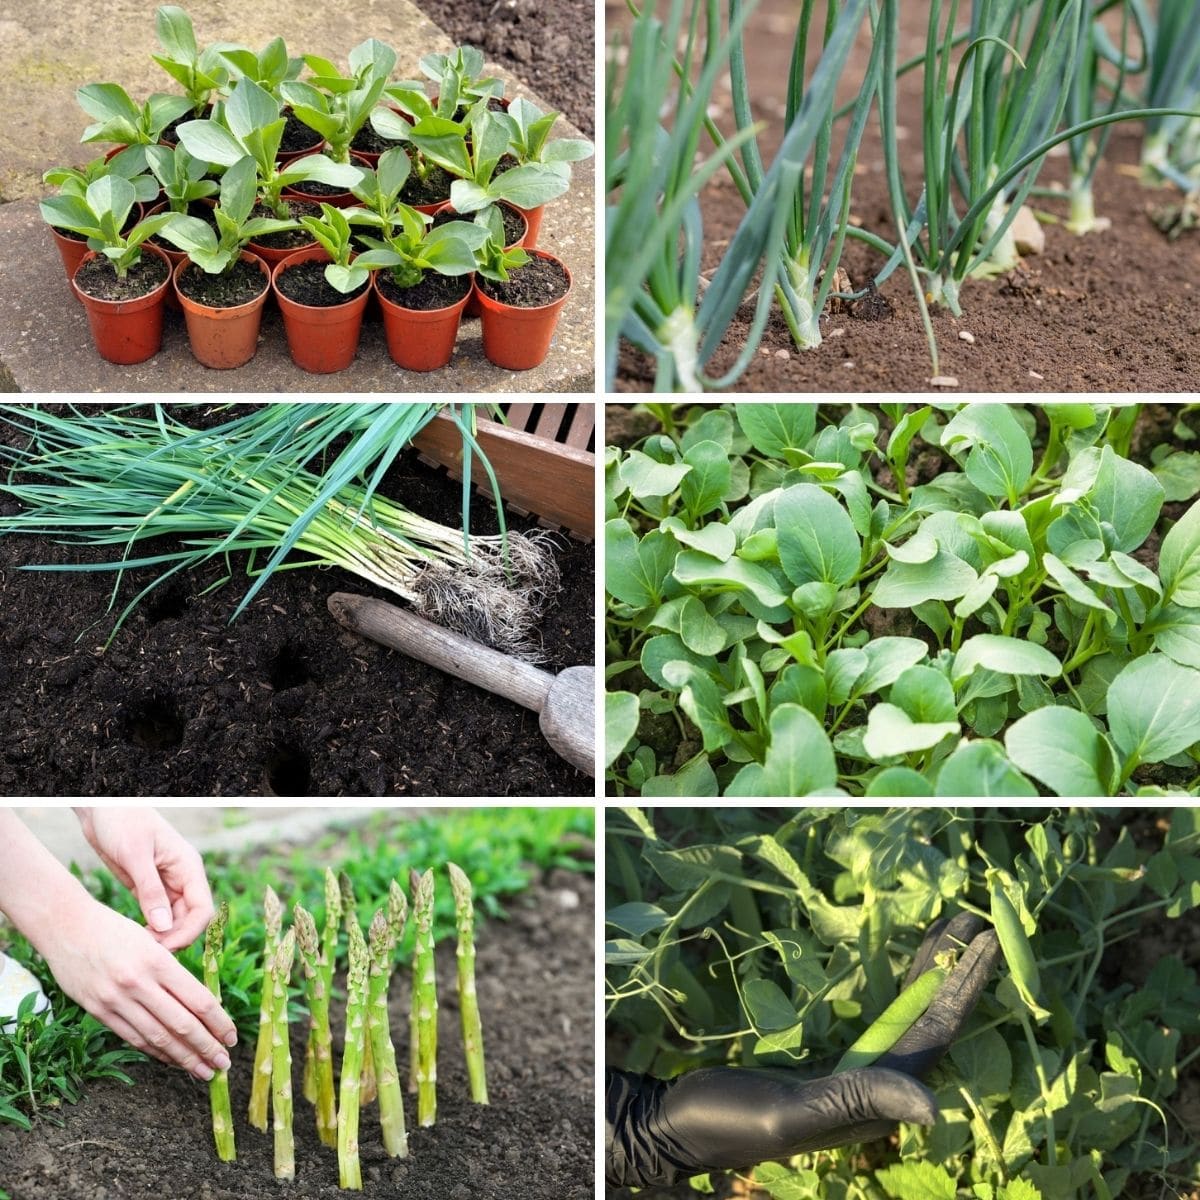 featured 12 Plants and Vegetables You Should Plant in the Late Fall - 12 Vegetables to Plant in the Late Fall for a Full Table